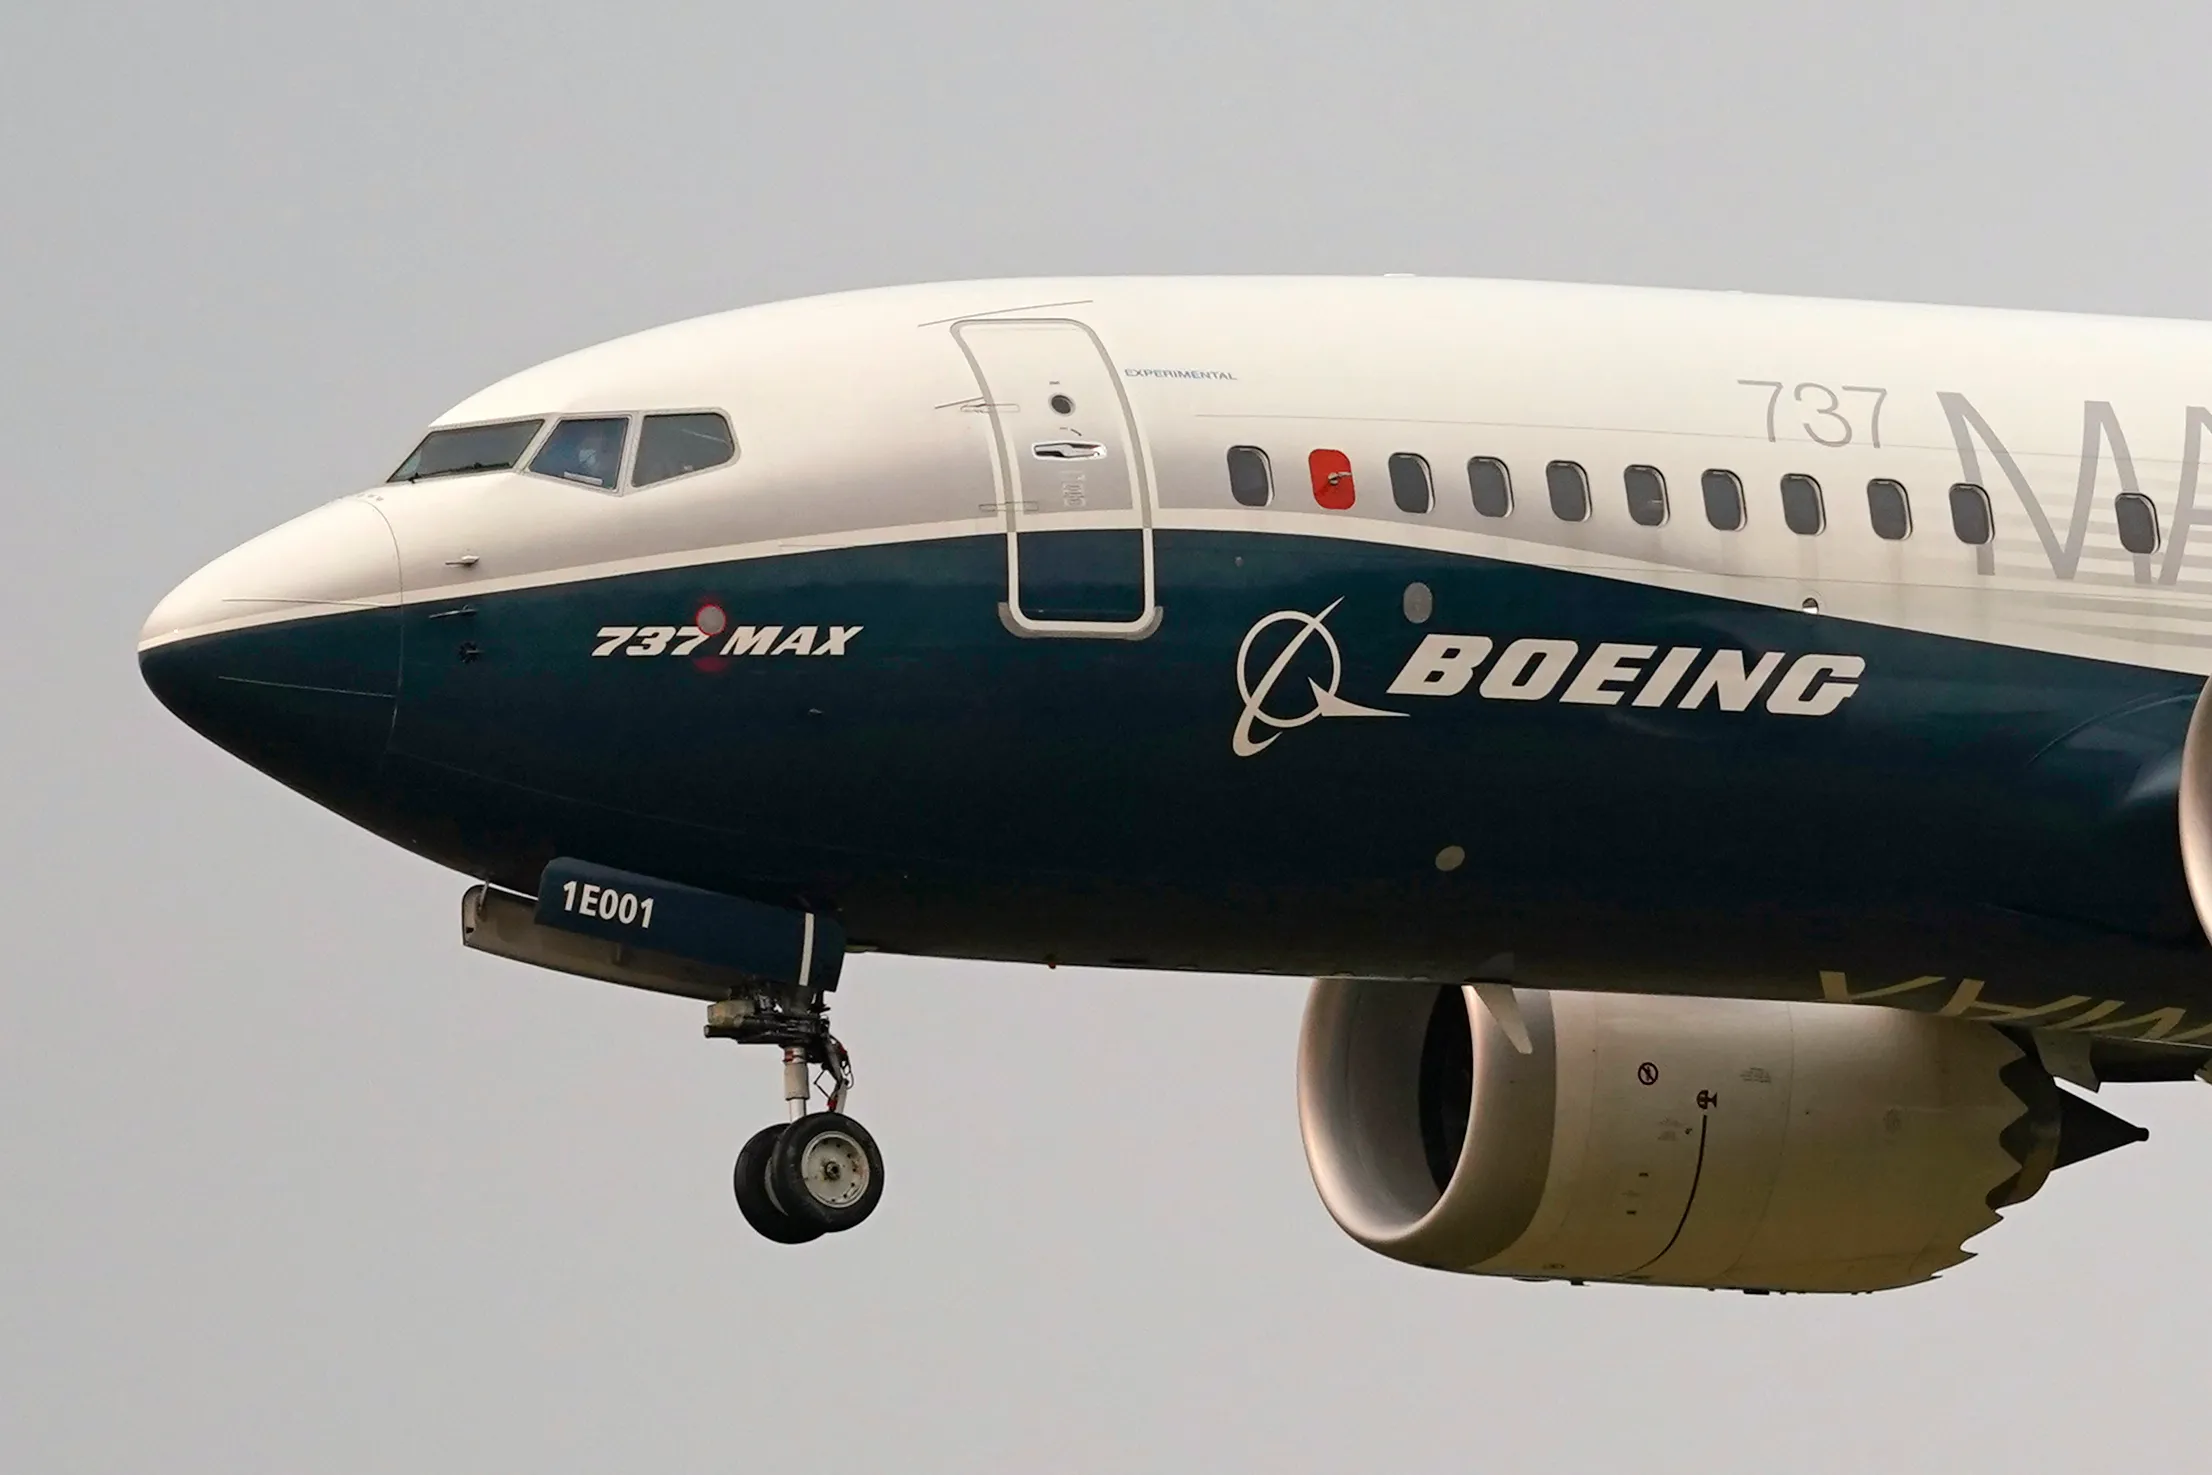 Boeing: From Sky High to Emergency Landings, What’s Going Wrong With Airplane Giant?